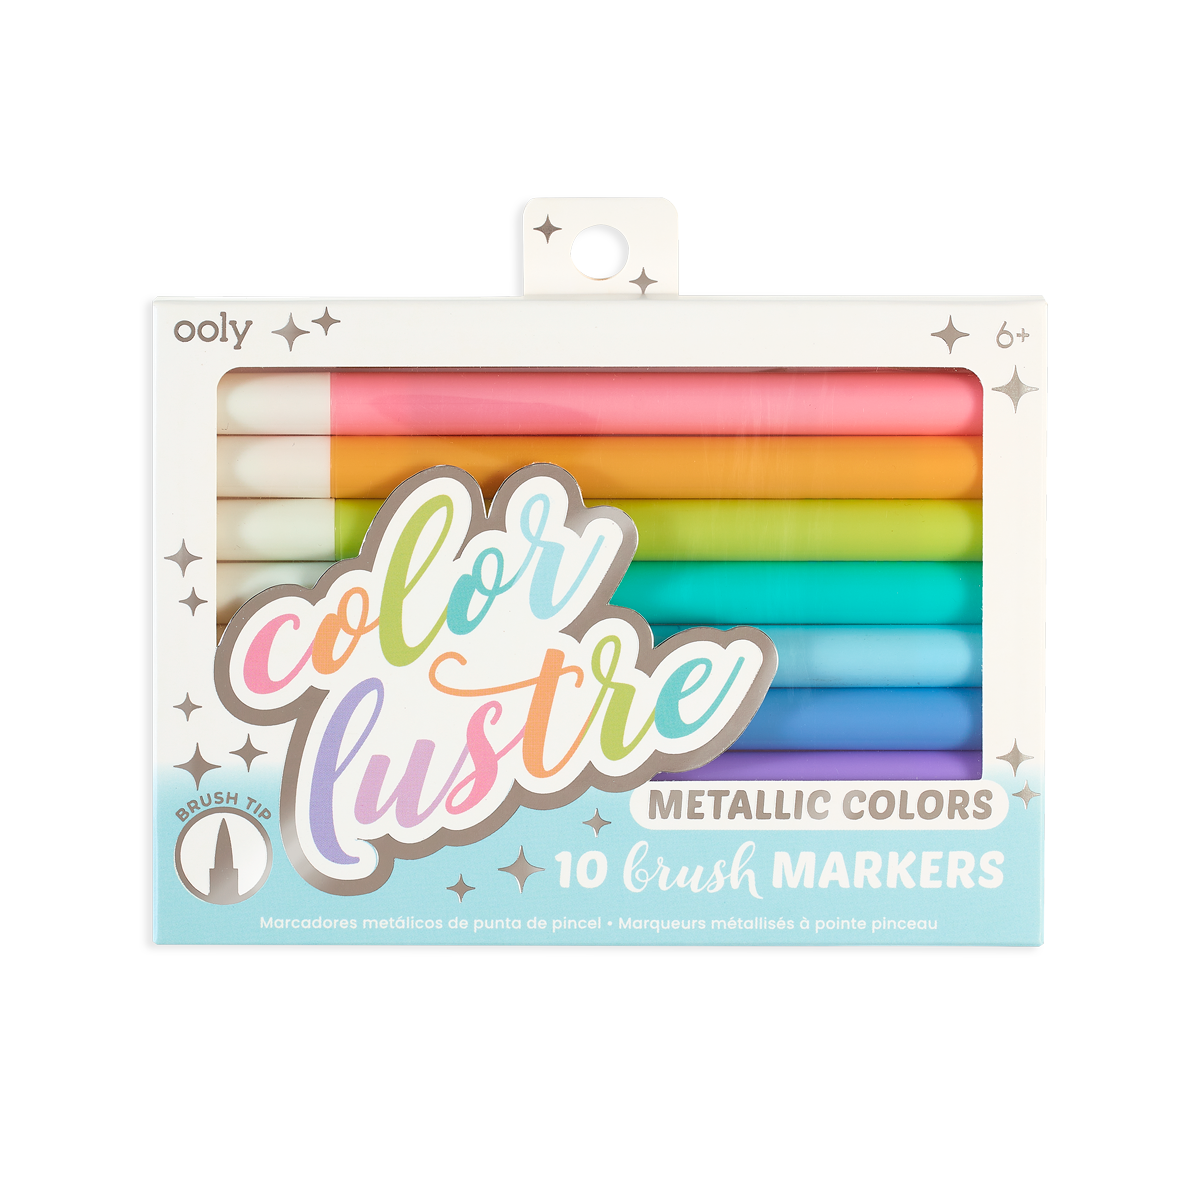 Oh My Glitter! Retractable Gel Pens - Set of 12 - OOLY - Where'd